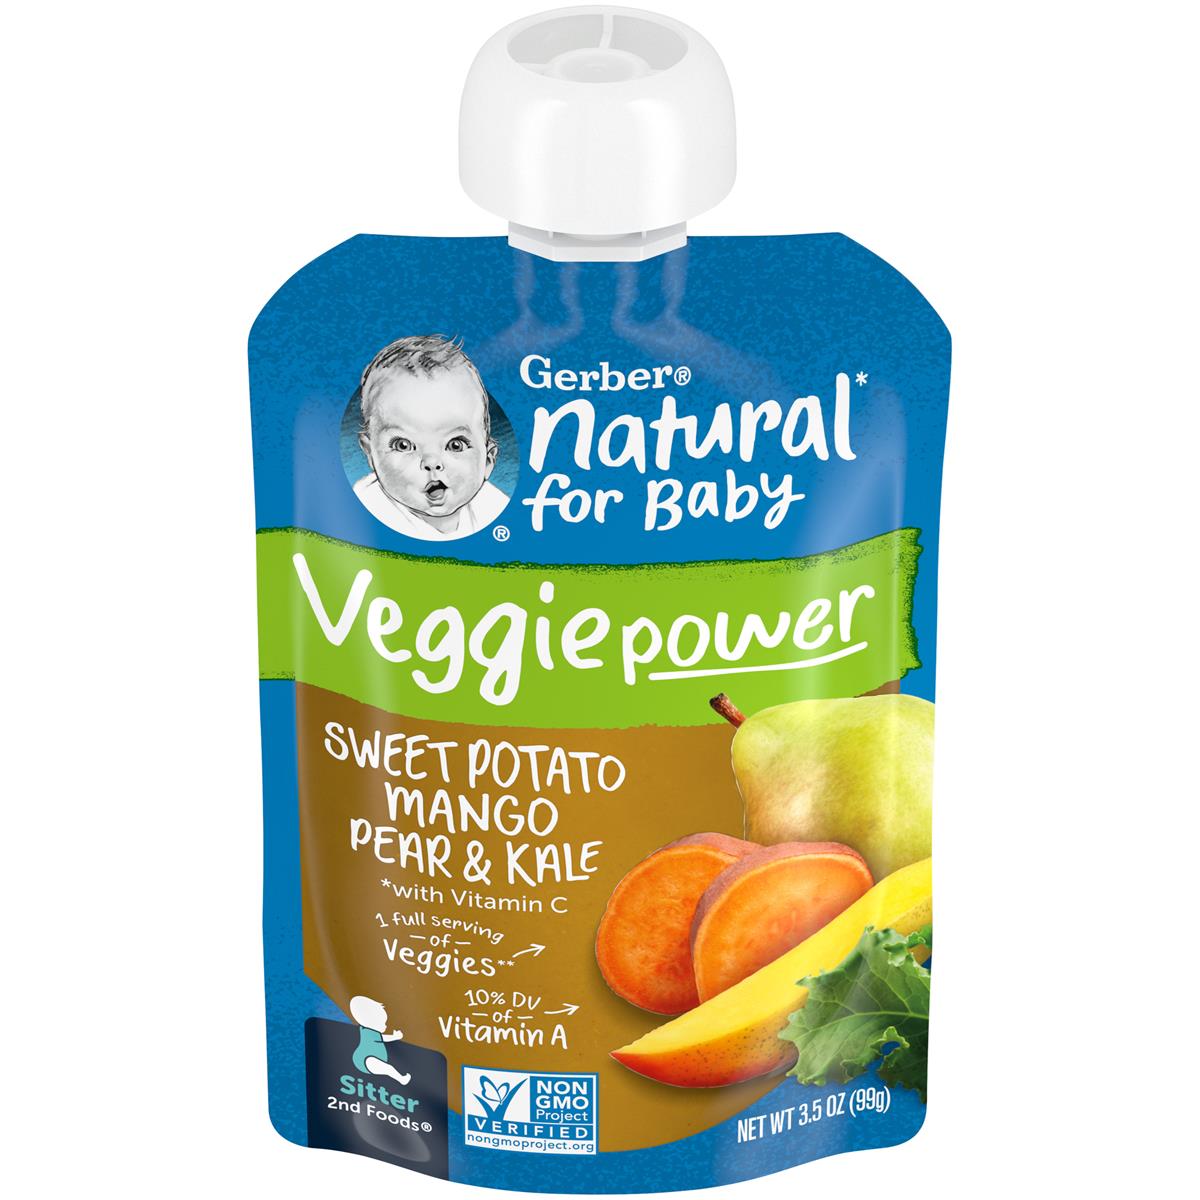 Gerber Natural For Baby 2nd Foods for Sitter, Sweet Potato Mango Pear & Kale - 99g